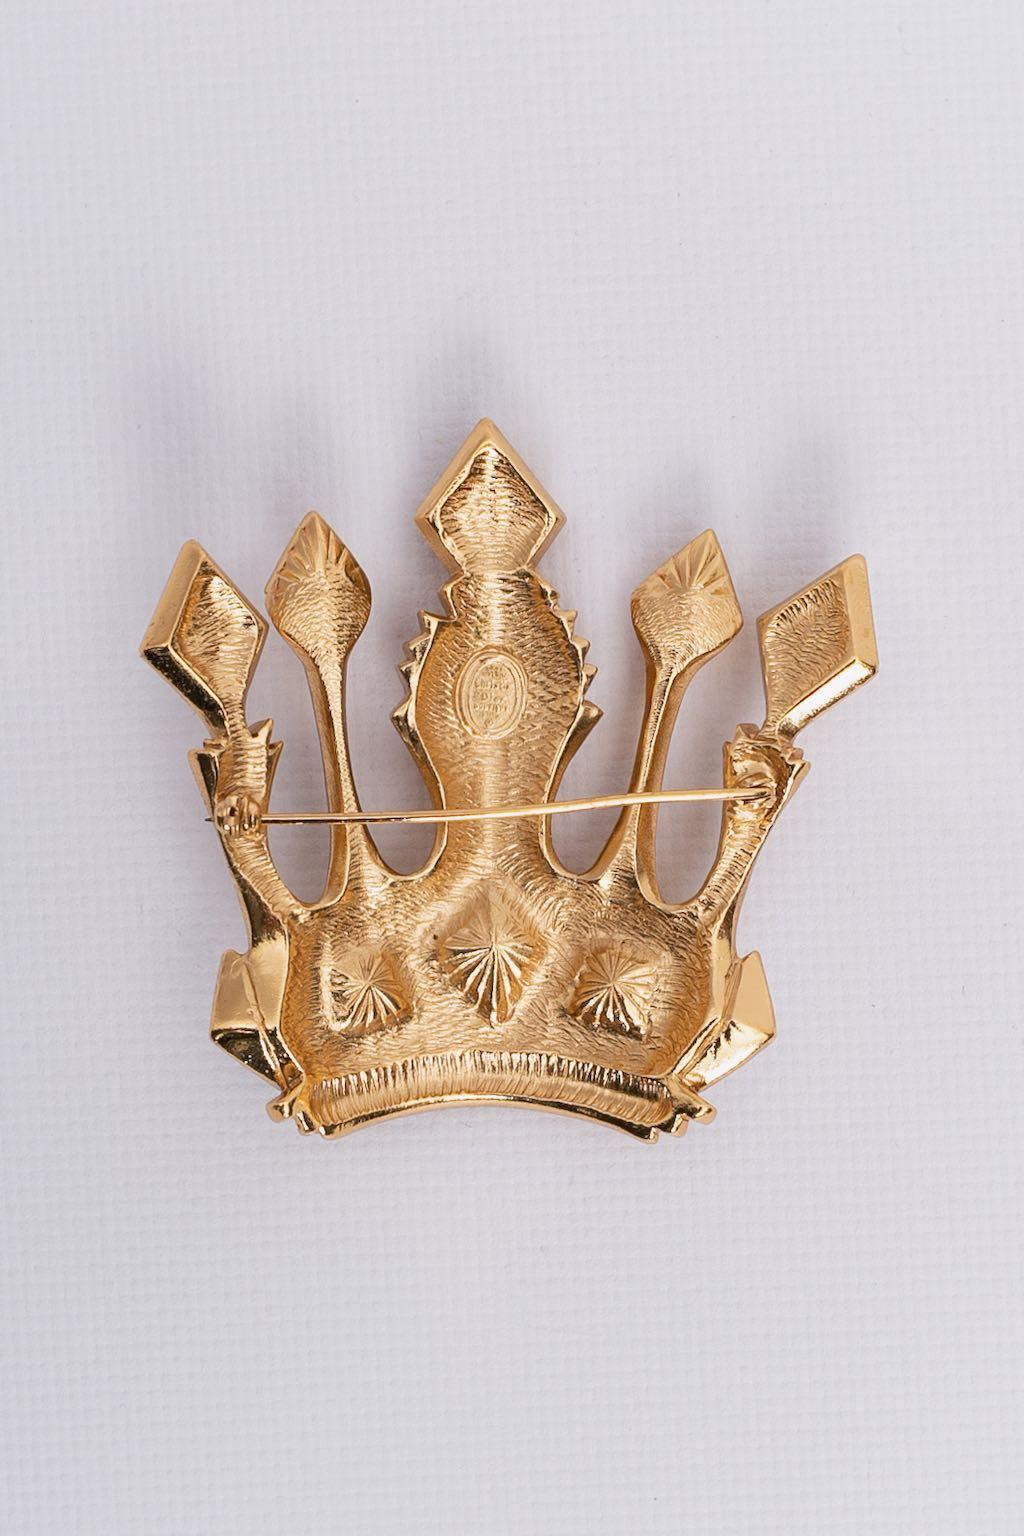 Dior - Brooch in gilded metal and rhinestones representing a crown.

Additional information:
Dimensions: 7 cm x 7.5 cm (2.75